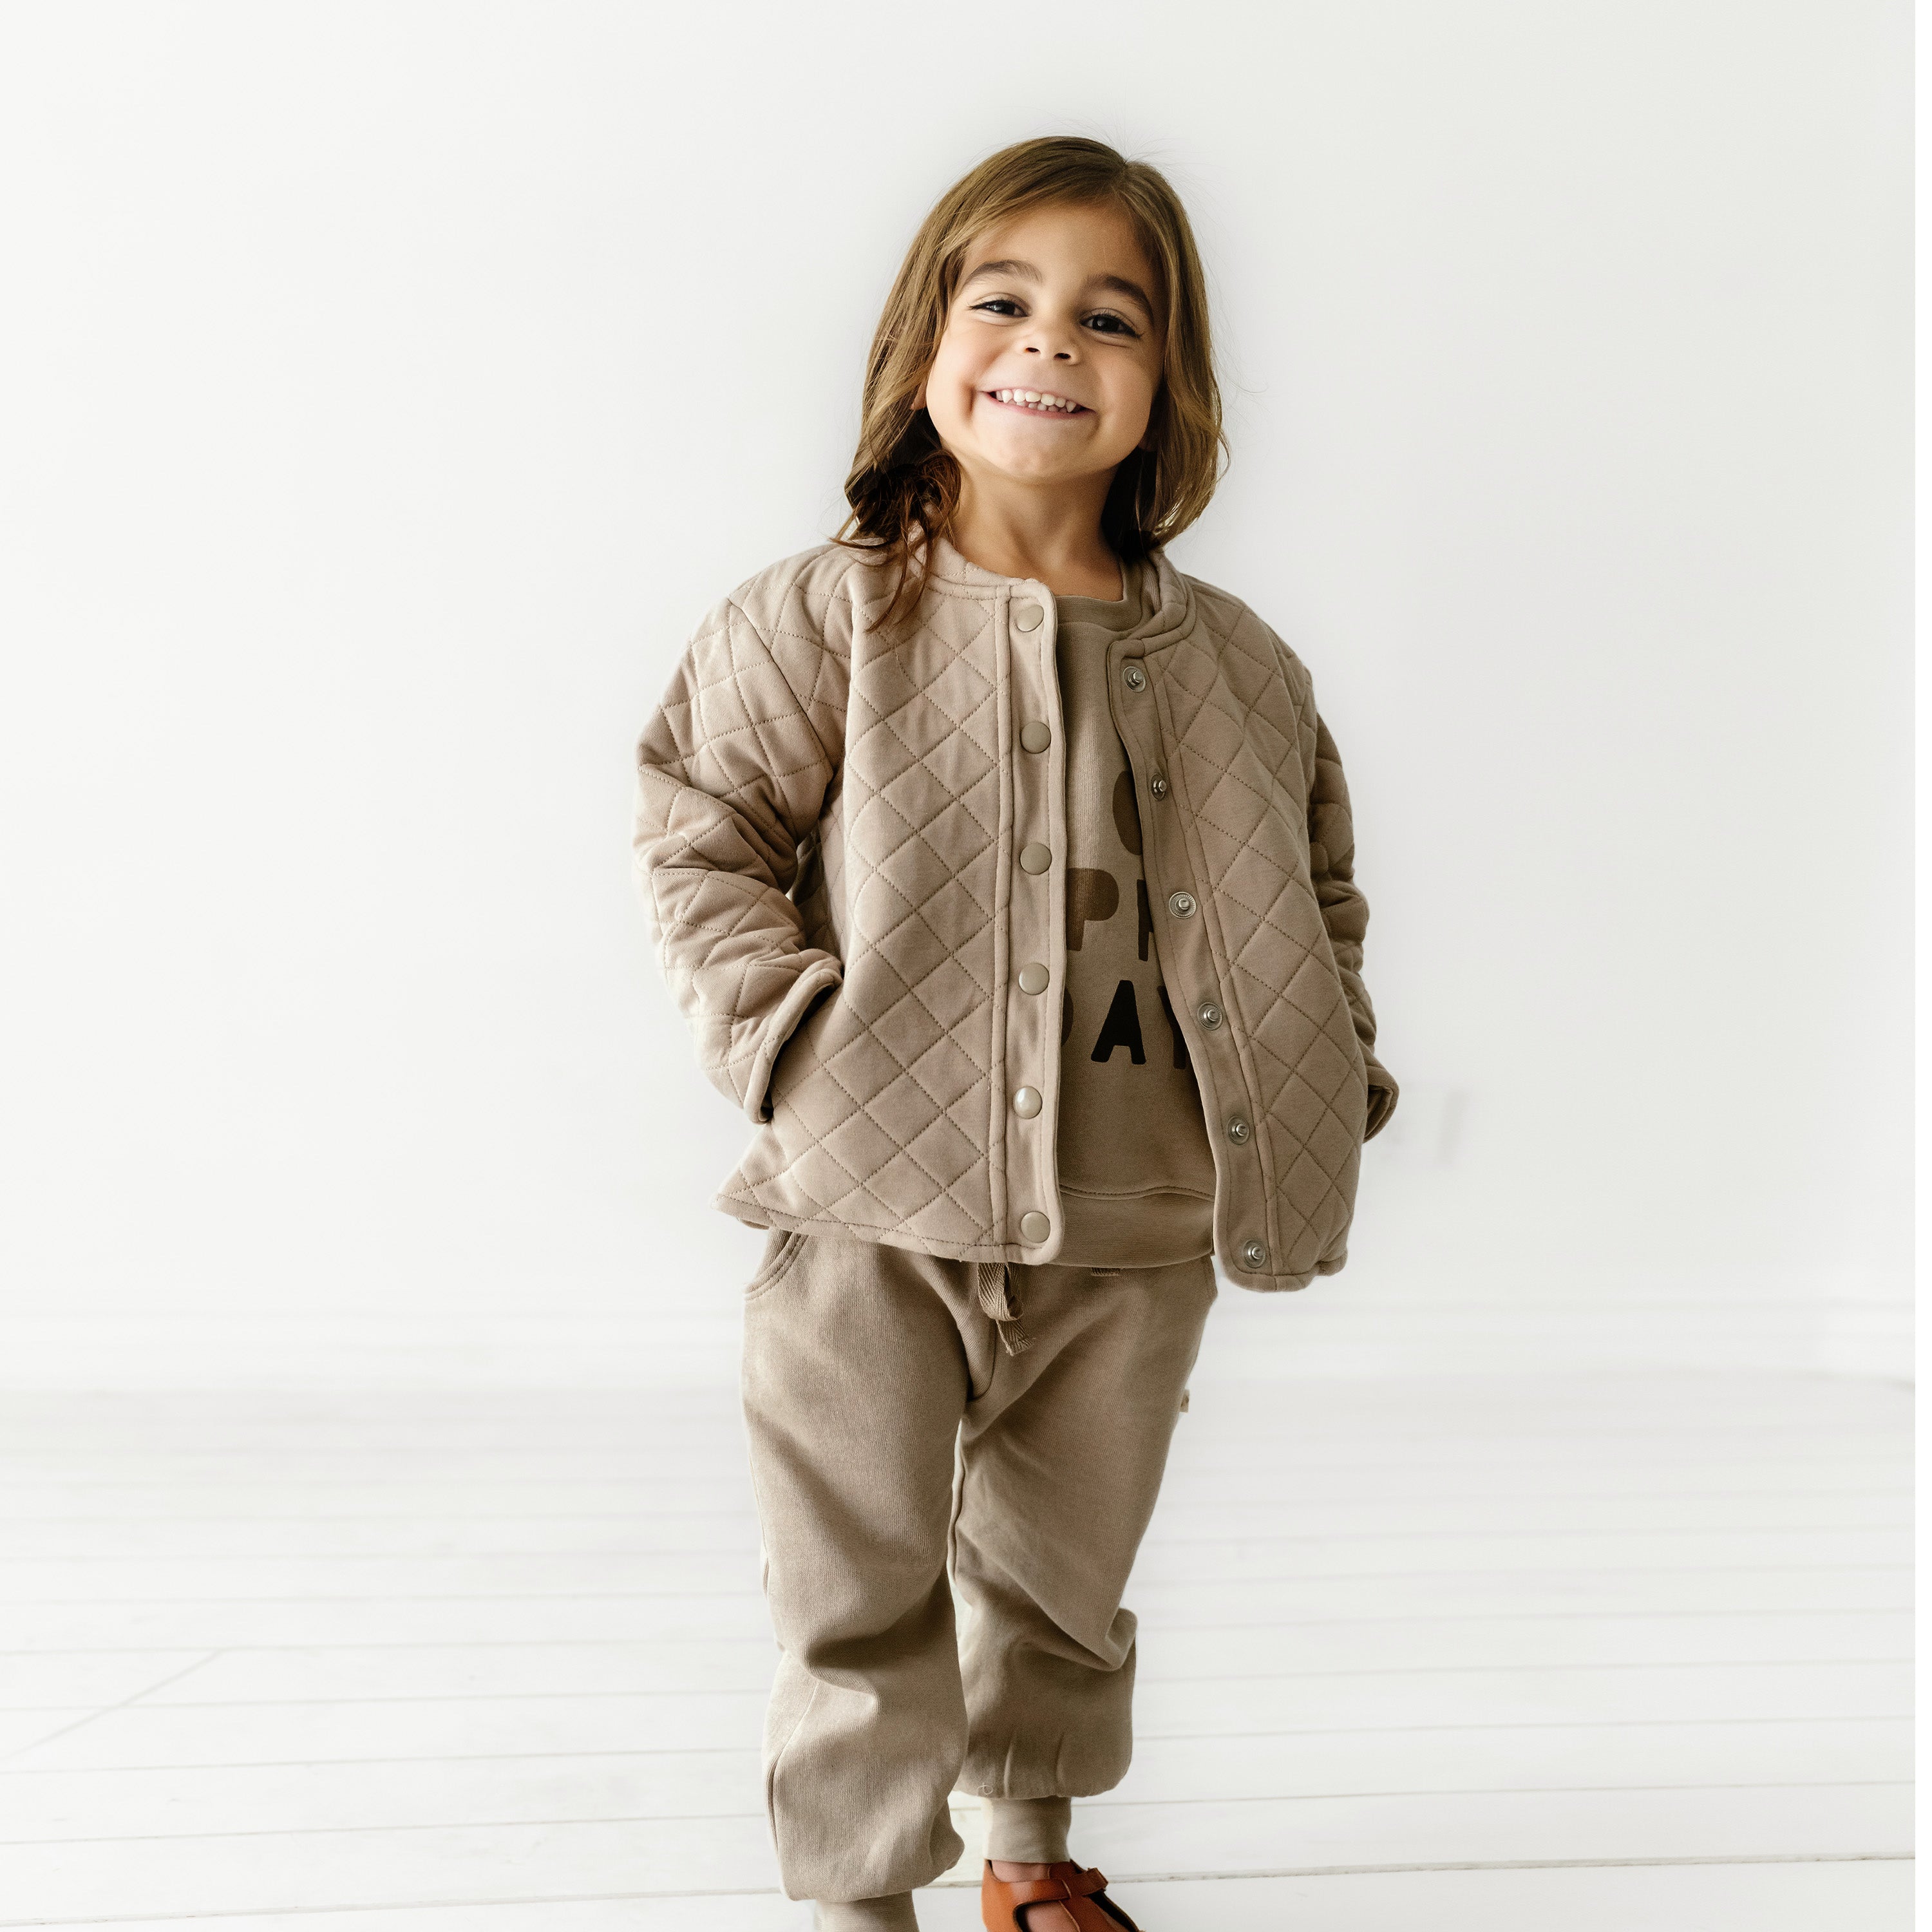 A joyful young girl stands in a well-lit room, wearing an Organic Kids organic merino wool buttoned jacket in mocha and matching pants, with a playful smile on her face.